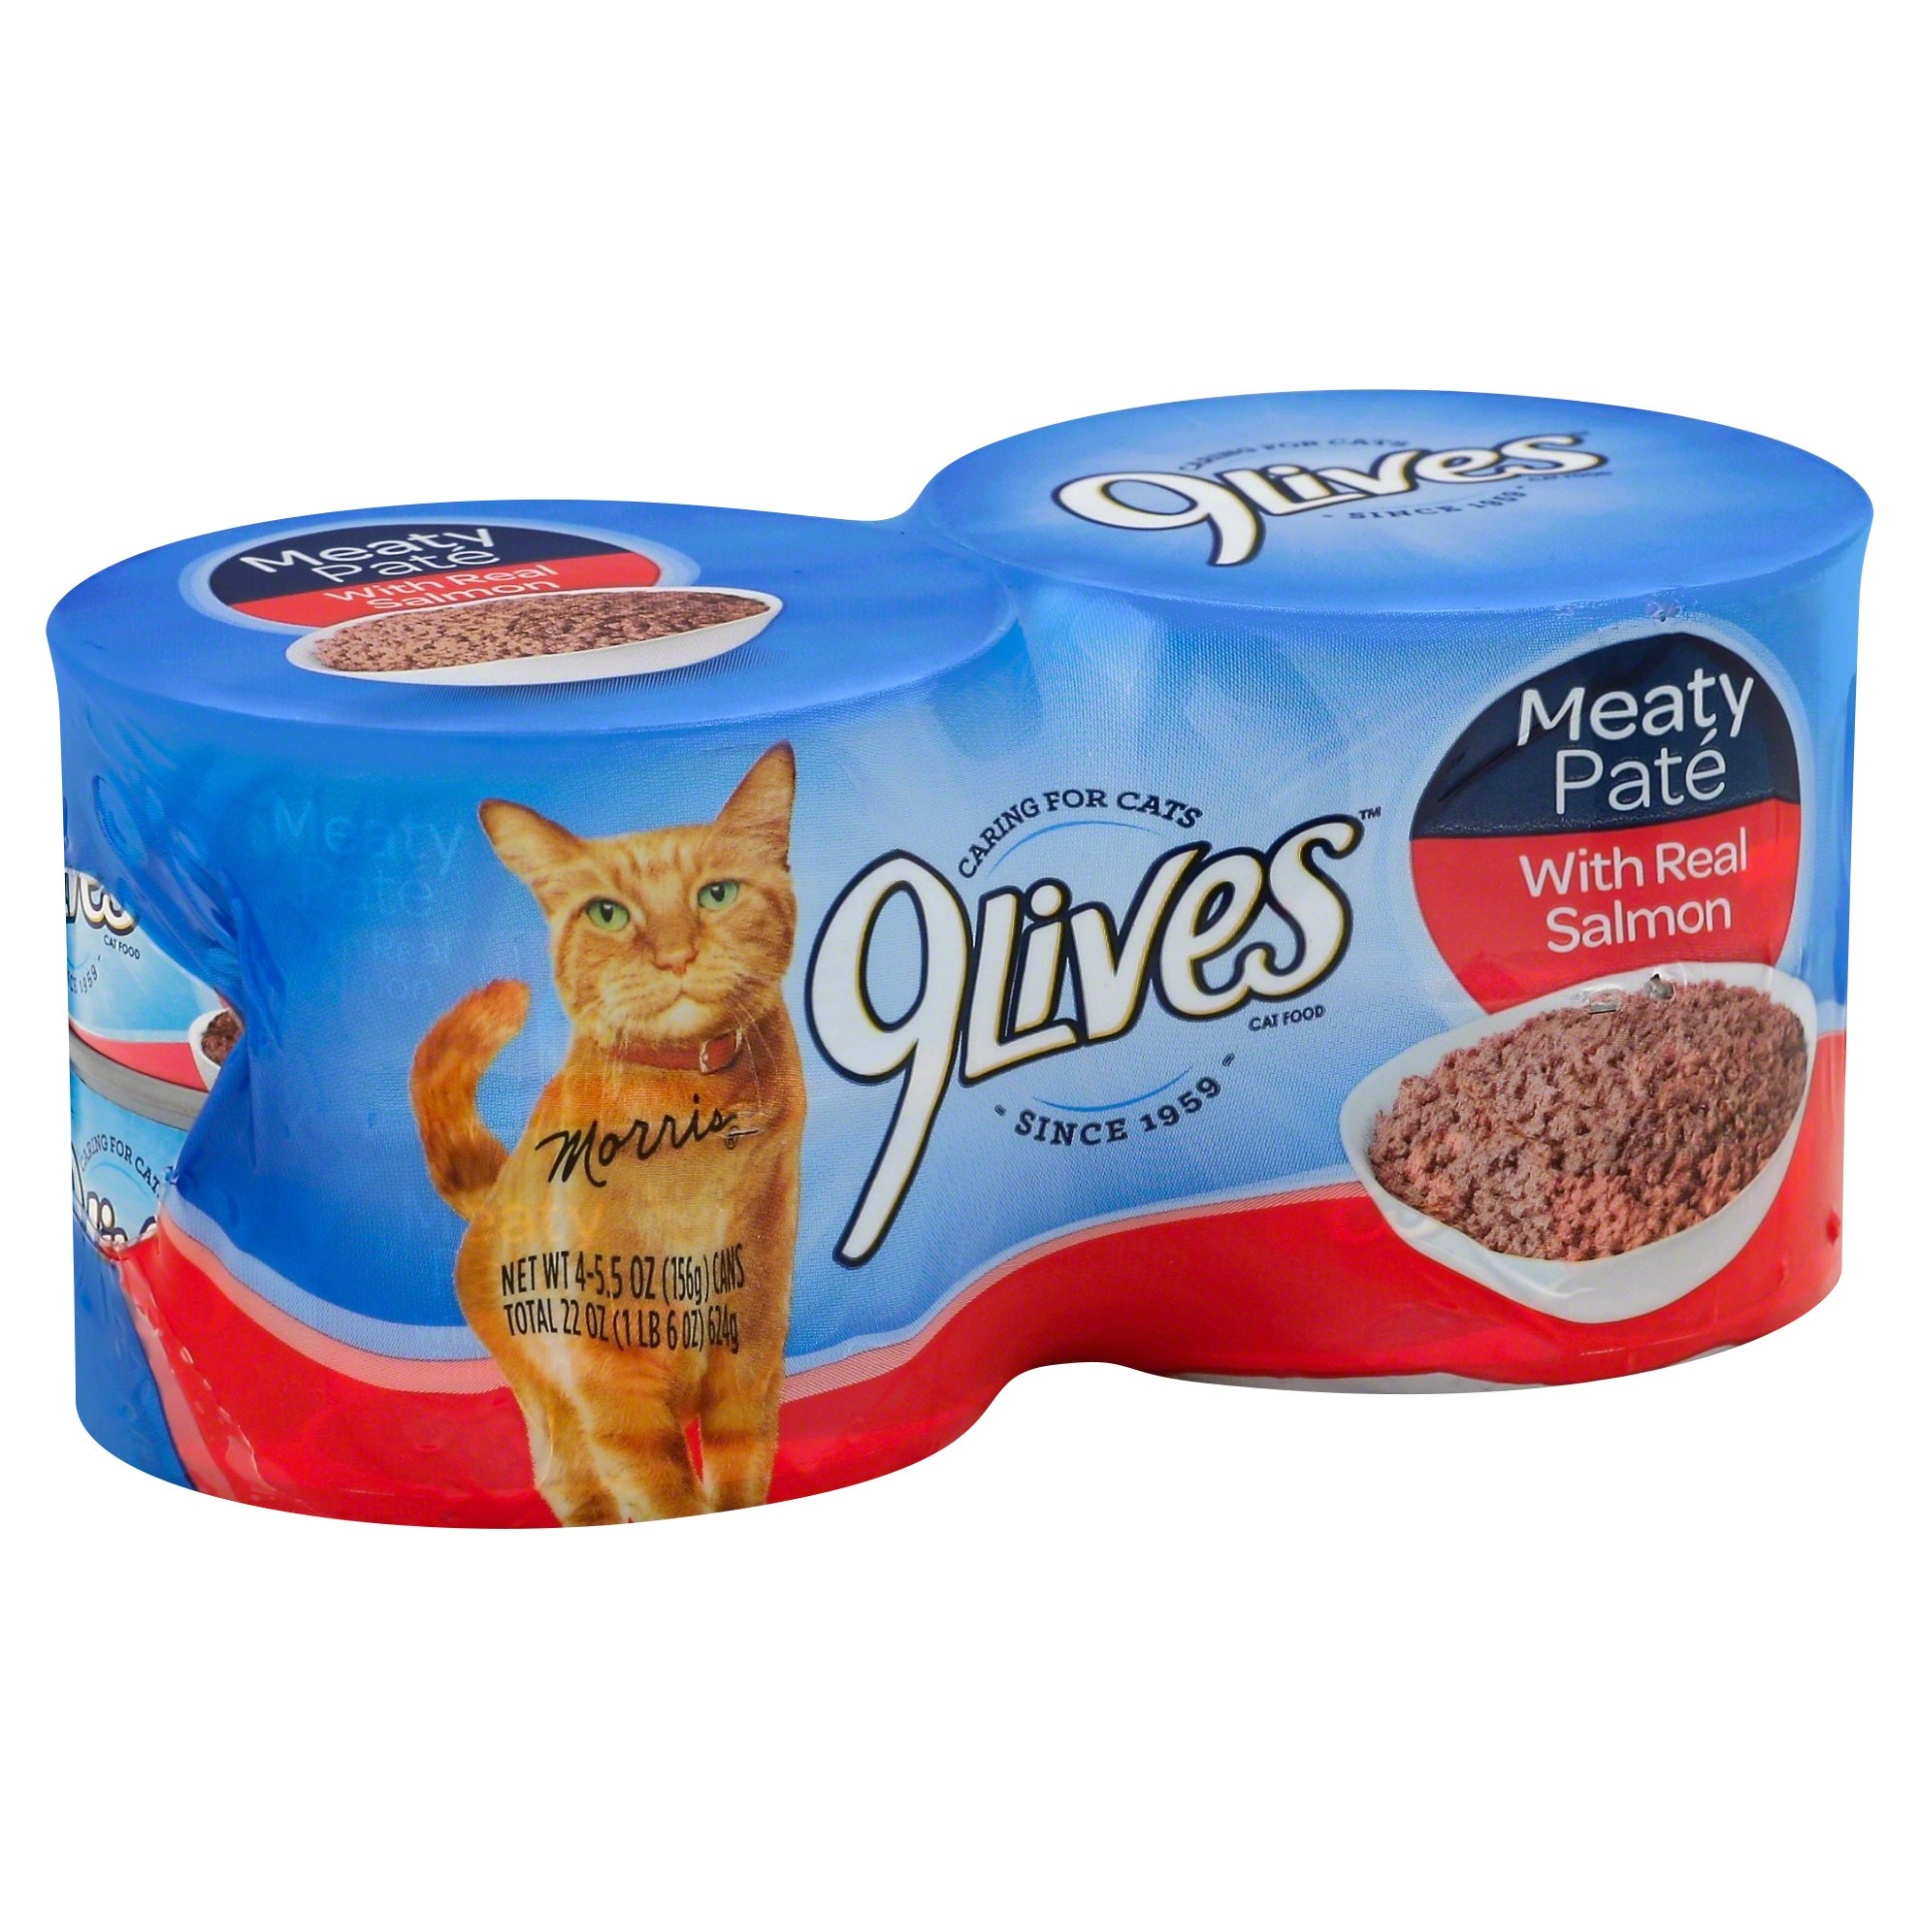 slide 1 of 2, 9Lives Cat Food, Meaty Paté with Real Salmon, 4 ct; 5.5 oz